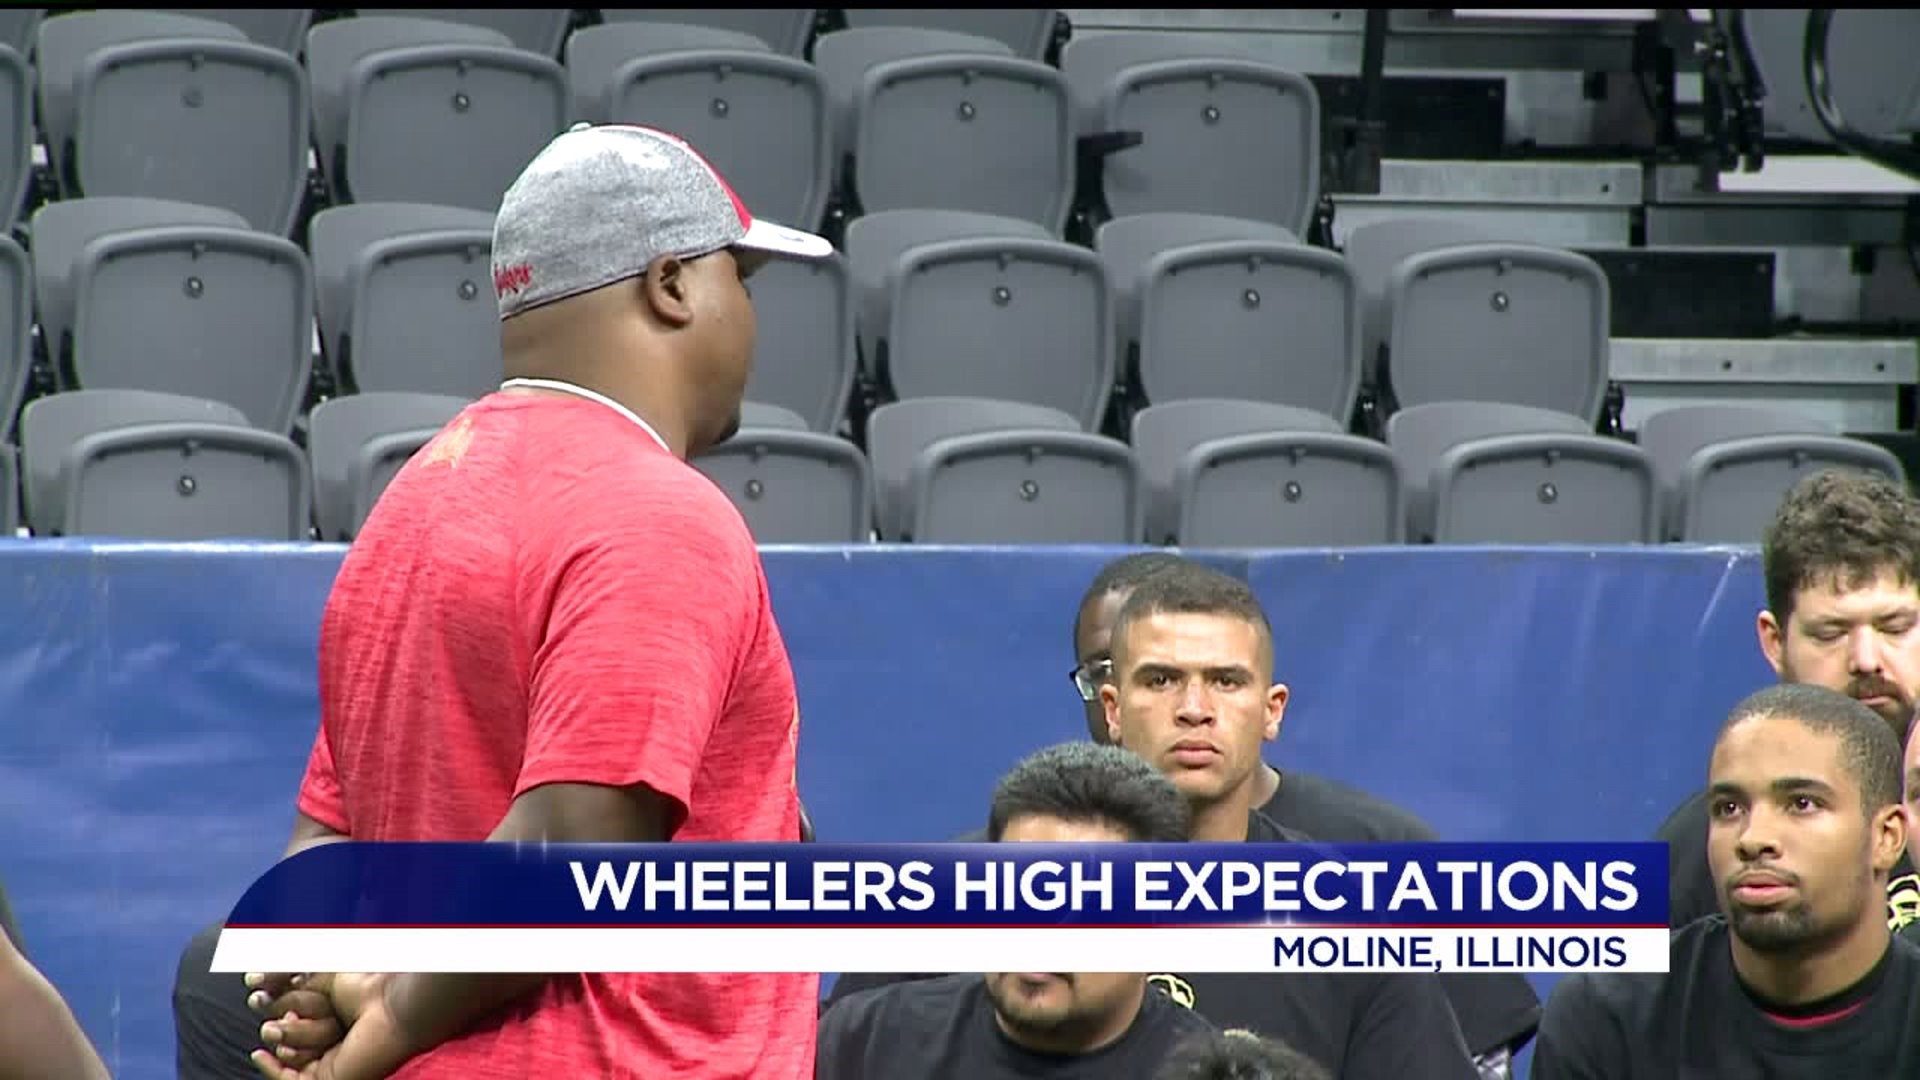 Wheelers have high expectations